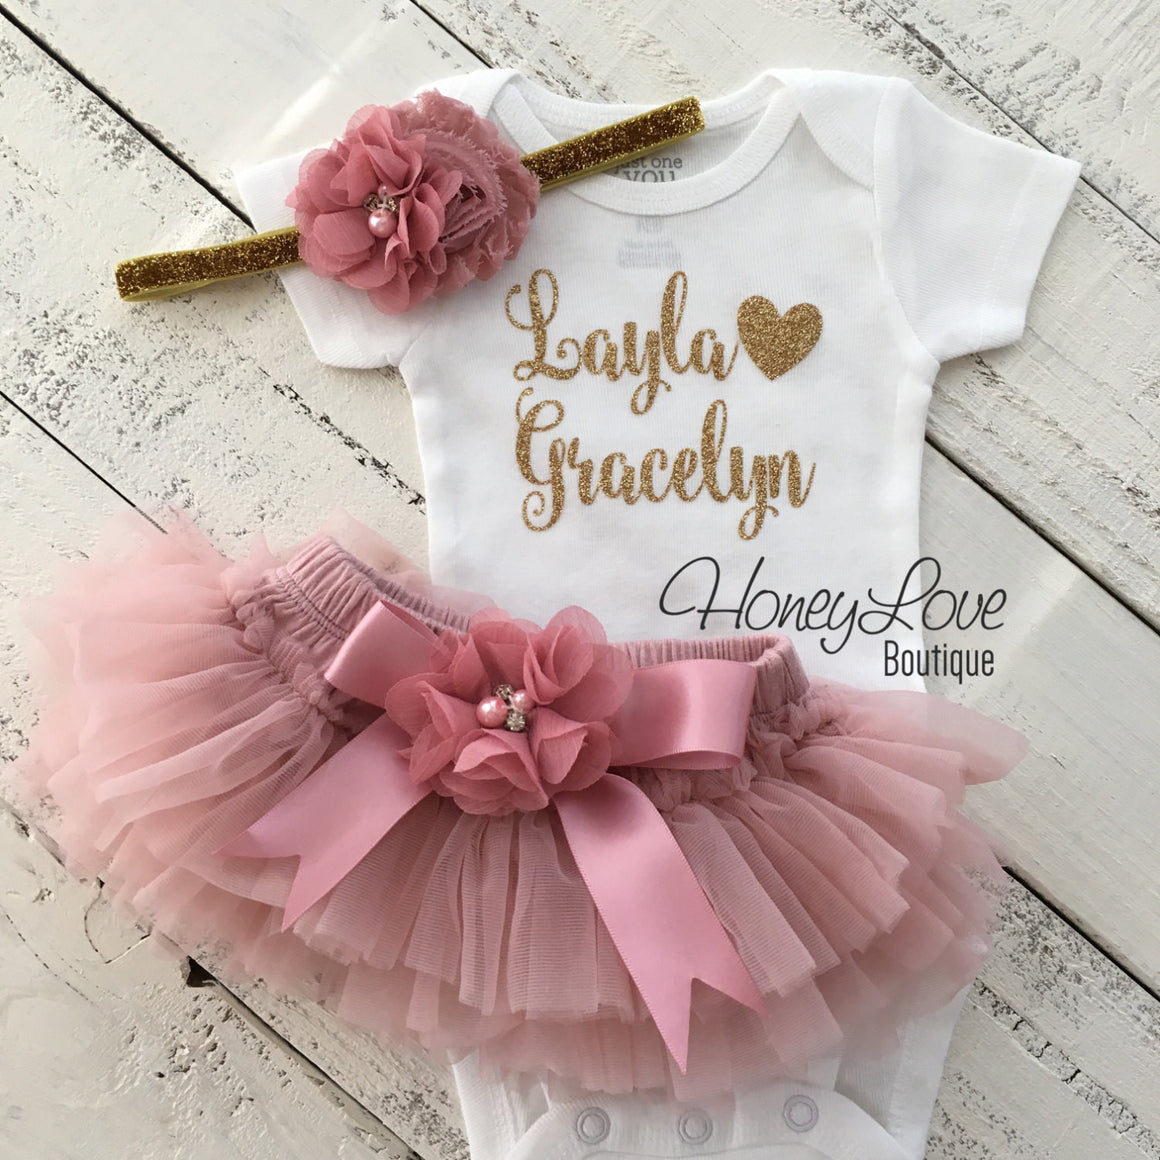 PERSONALIZED Name Outfit - Gold Glitter and Vintage Pink - Embellished tutu skirt bloomers - HoneyLoveBoutique